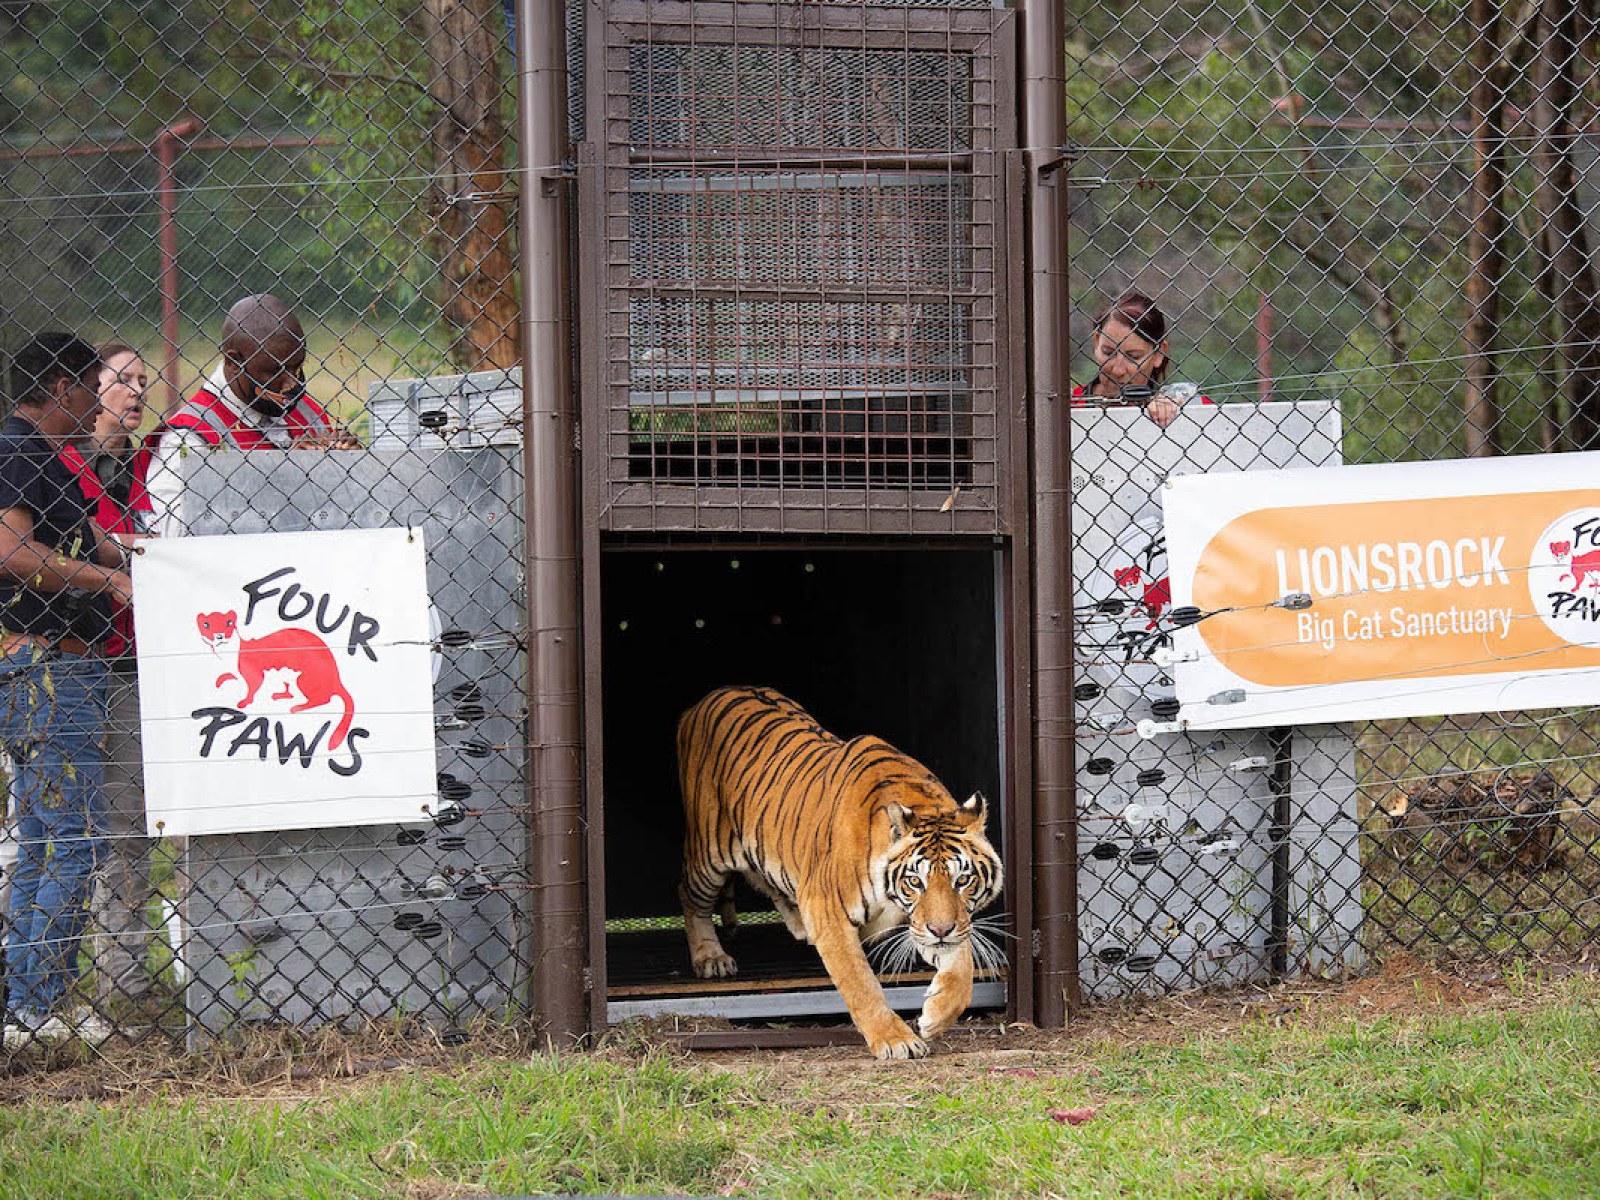 4 Circus Tigers Sent to Animal Sanctuary After Spending 15 Years in a Cage